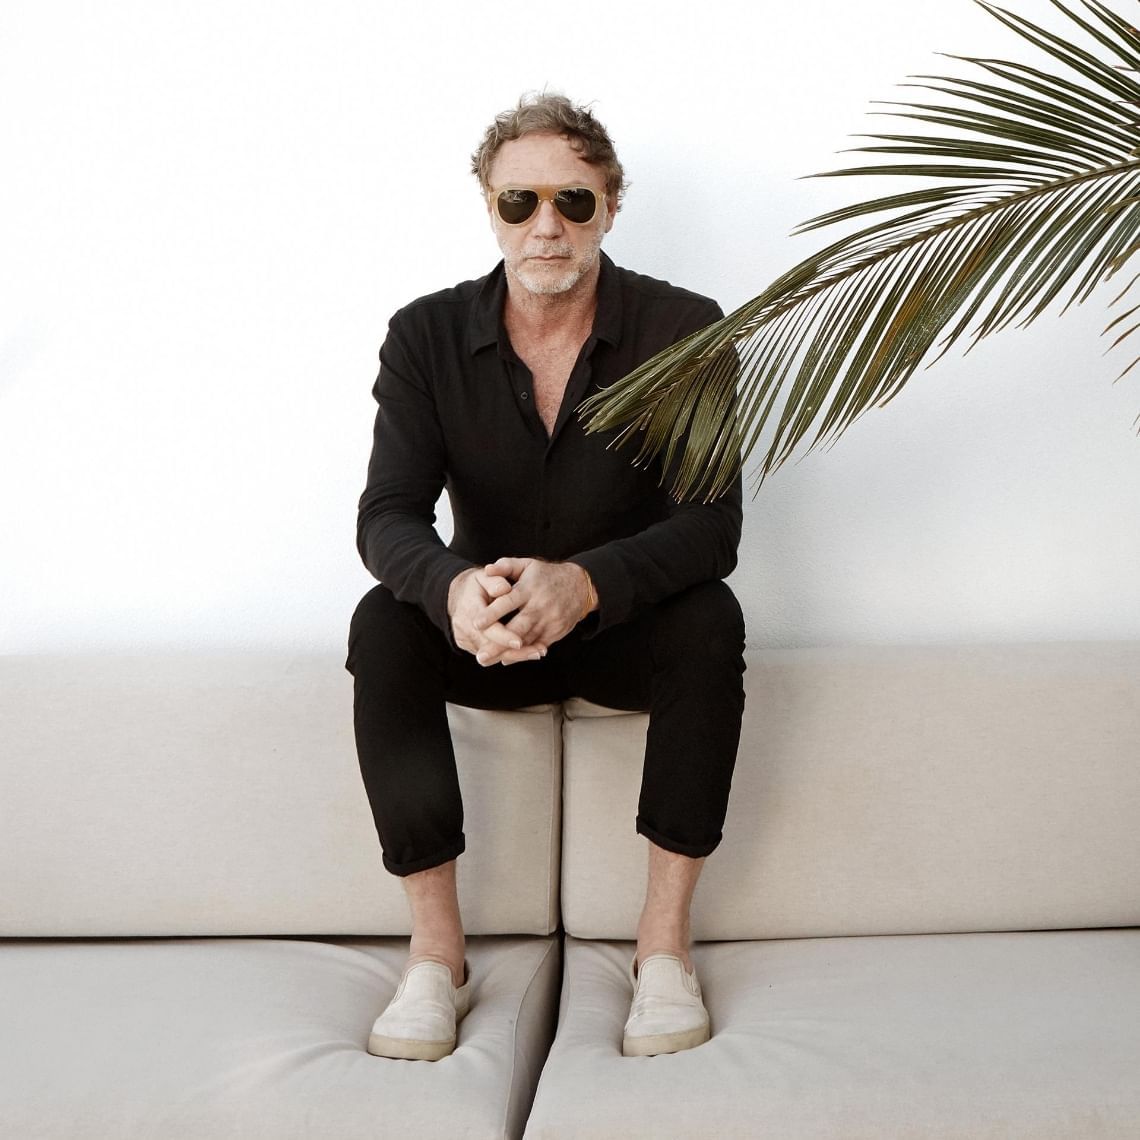 Oskar Metsavaht sitting on a couch wearing sunglasses with a palm frond in the foreground